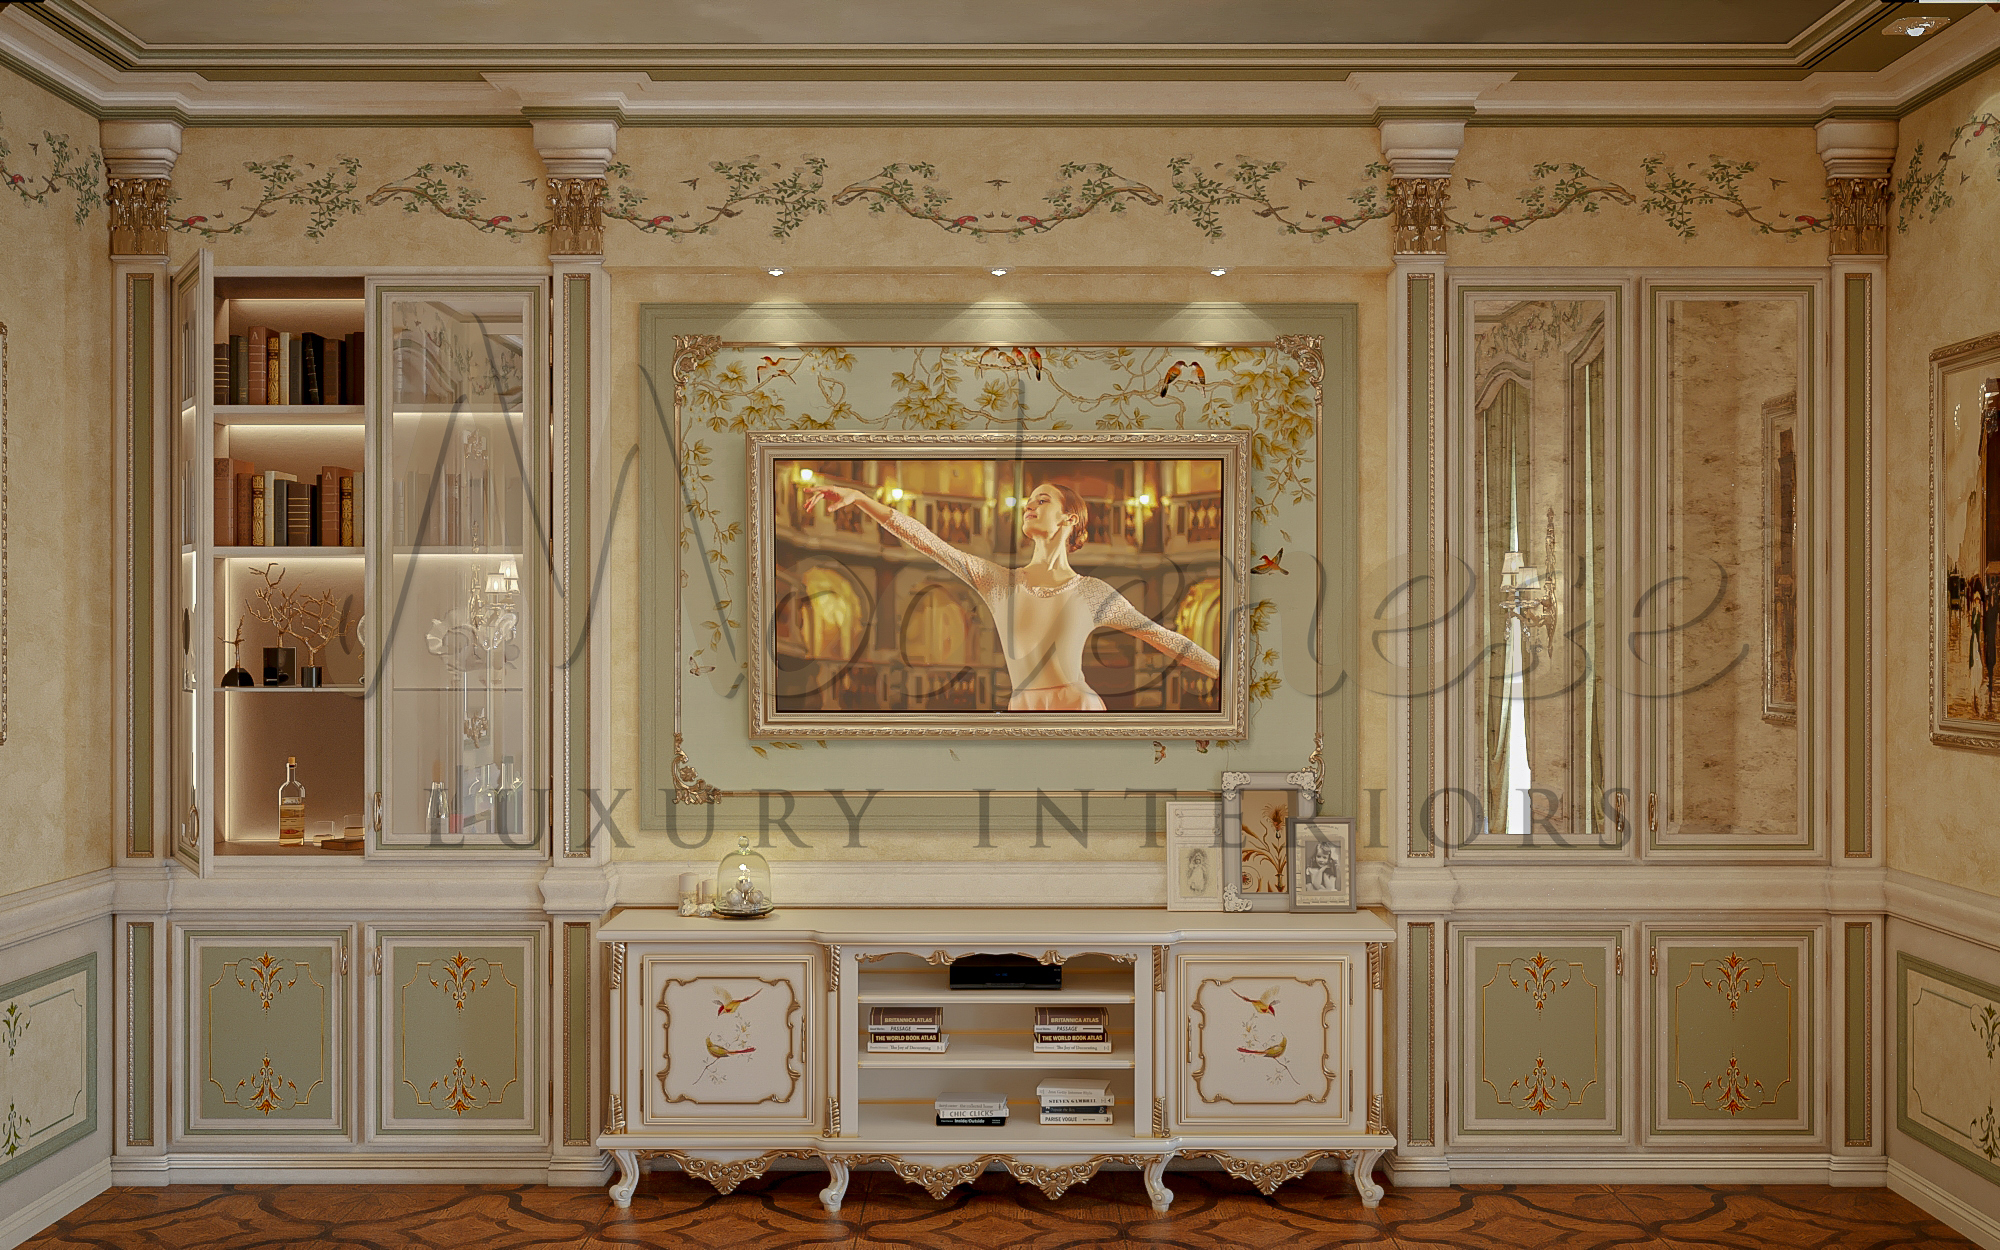 Top quality classic style interiors, all made in Italy with exclusive design. Elegant custom-made projects by skilled designers and architects. Best project portfolio for royal villas.High quality furniture for luxury villas.